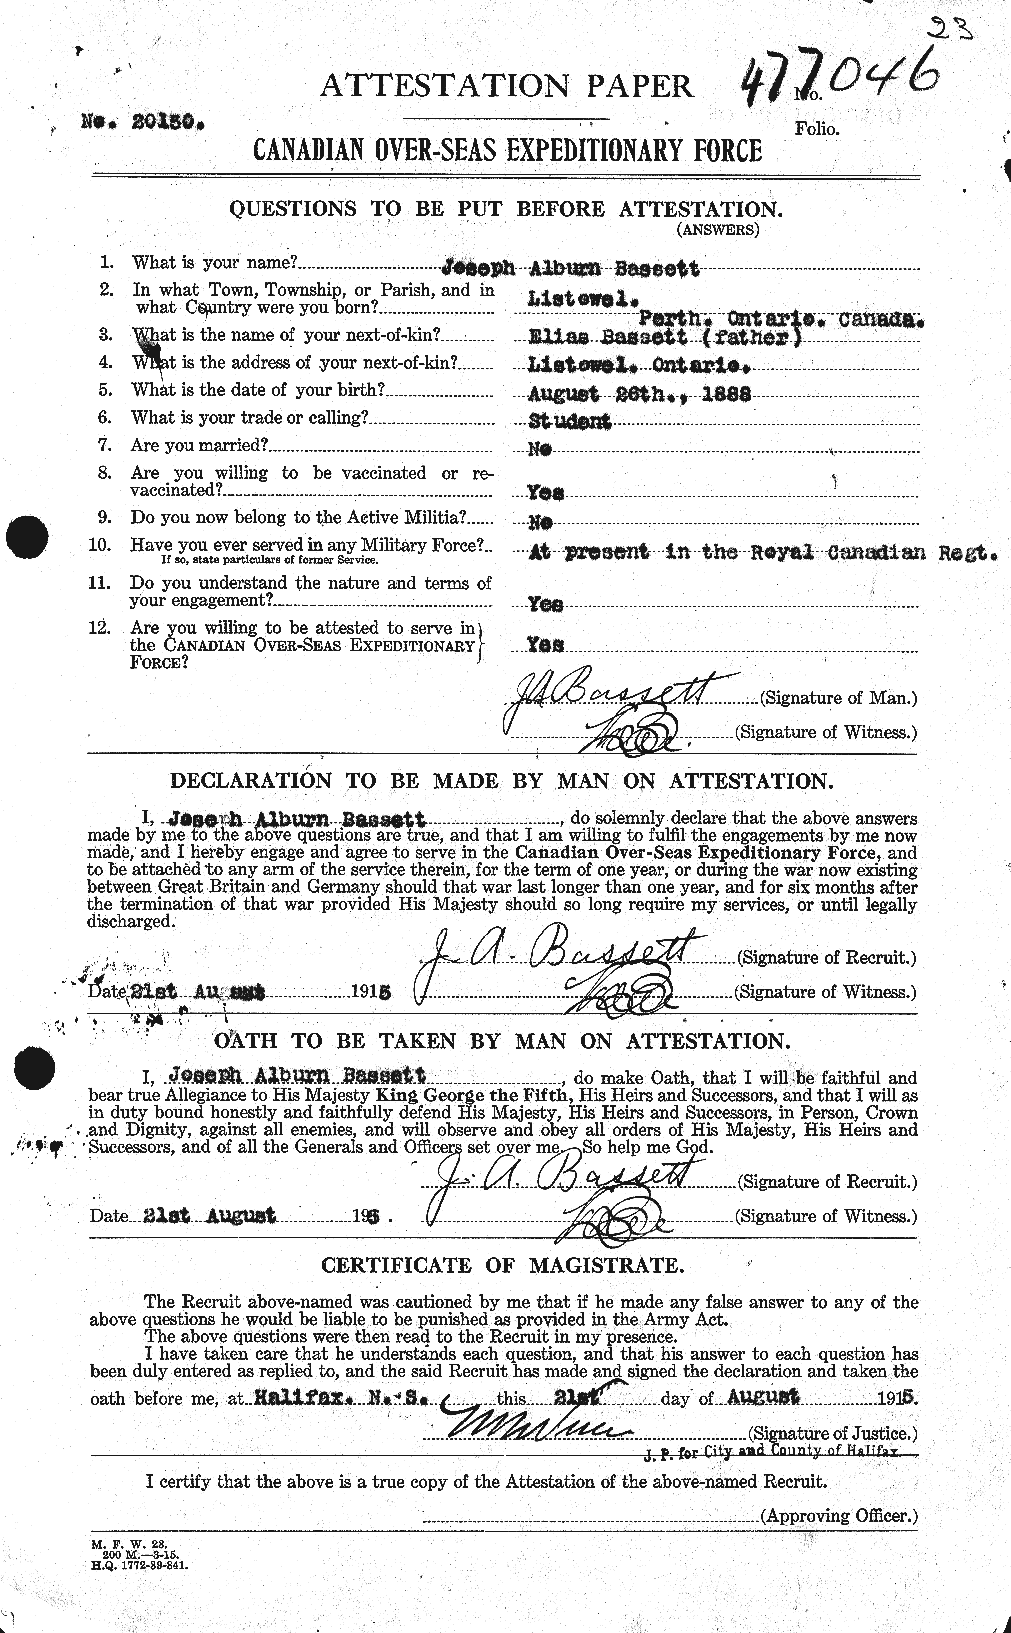 Personnel Records of the First World War - CEF 221052a